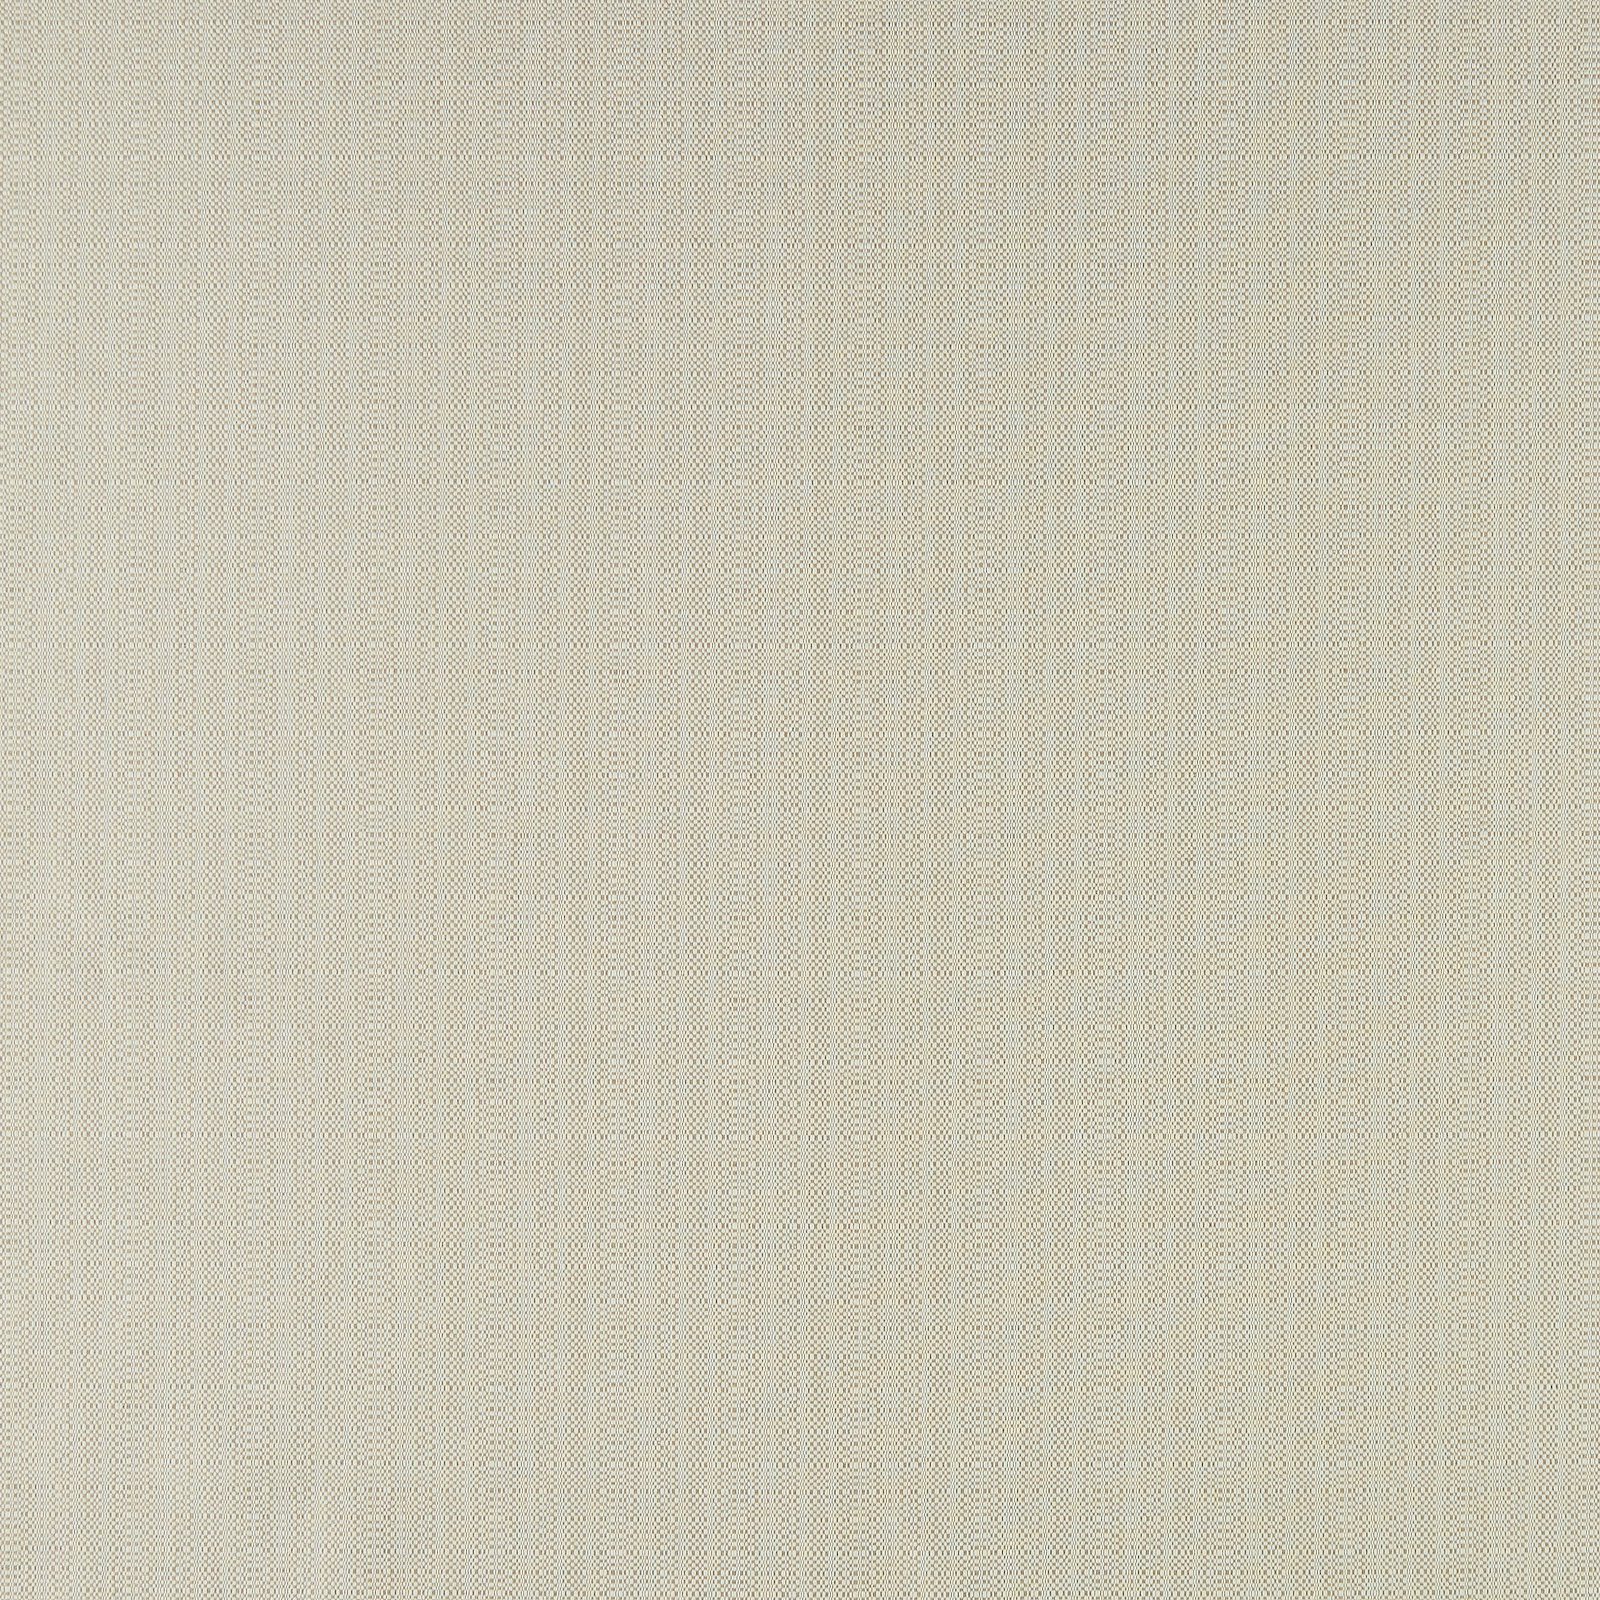 Recycled jacquard offwhite/sand mønster 780943_pack_sp